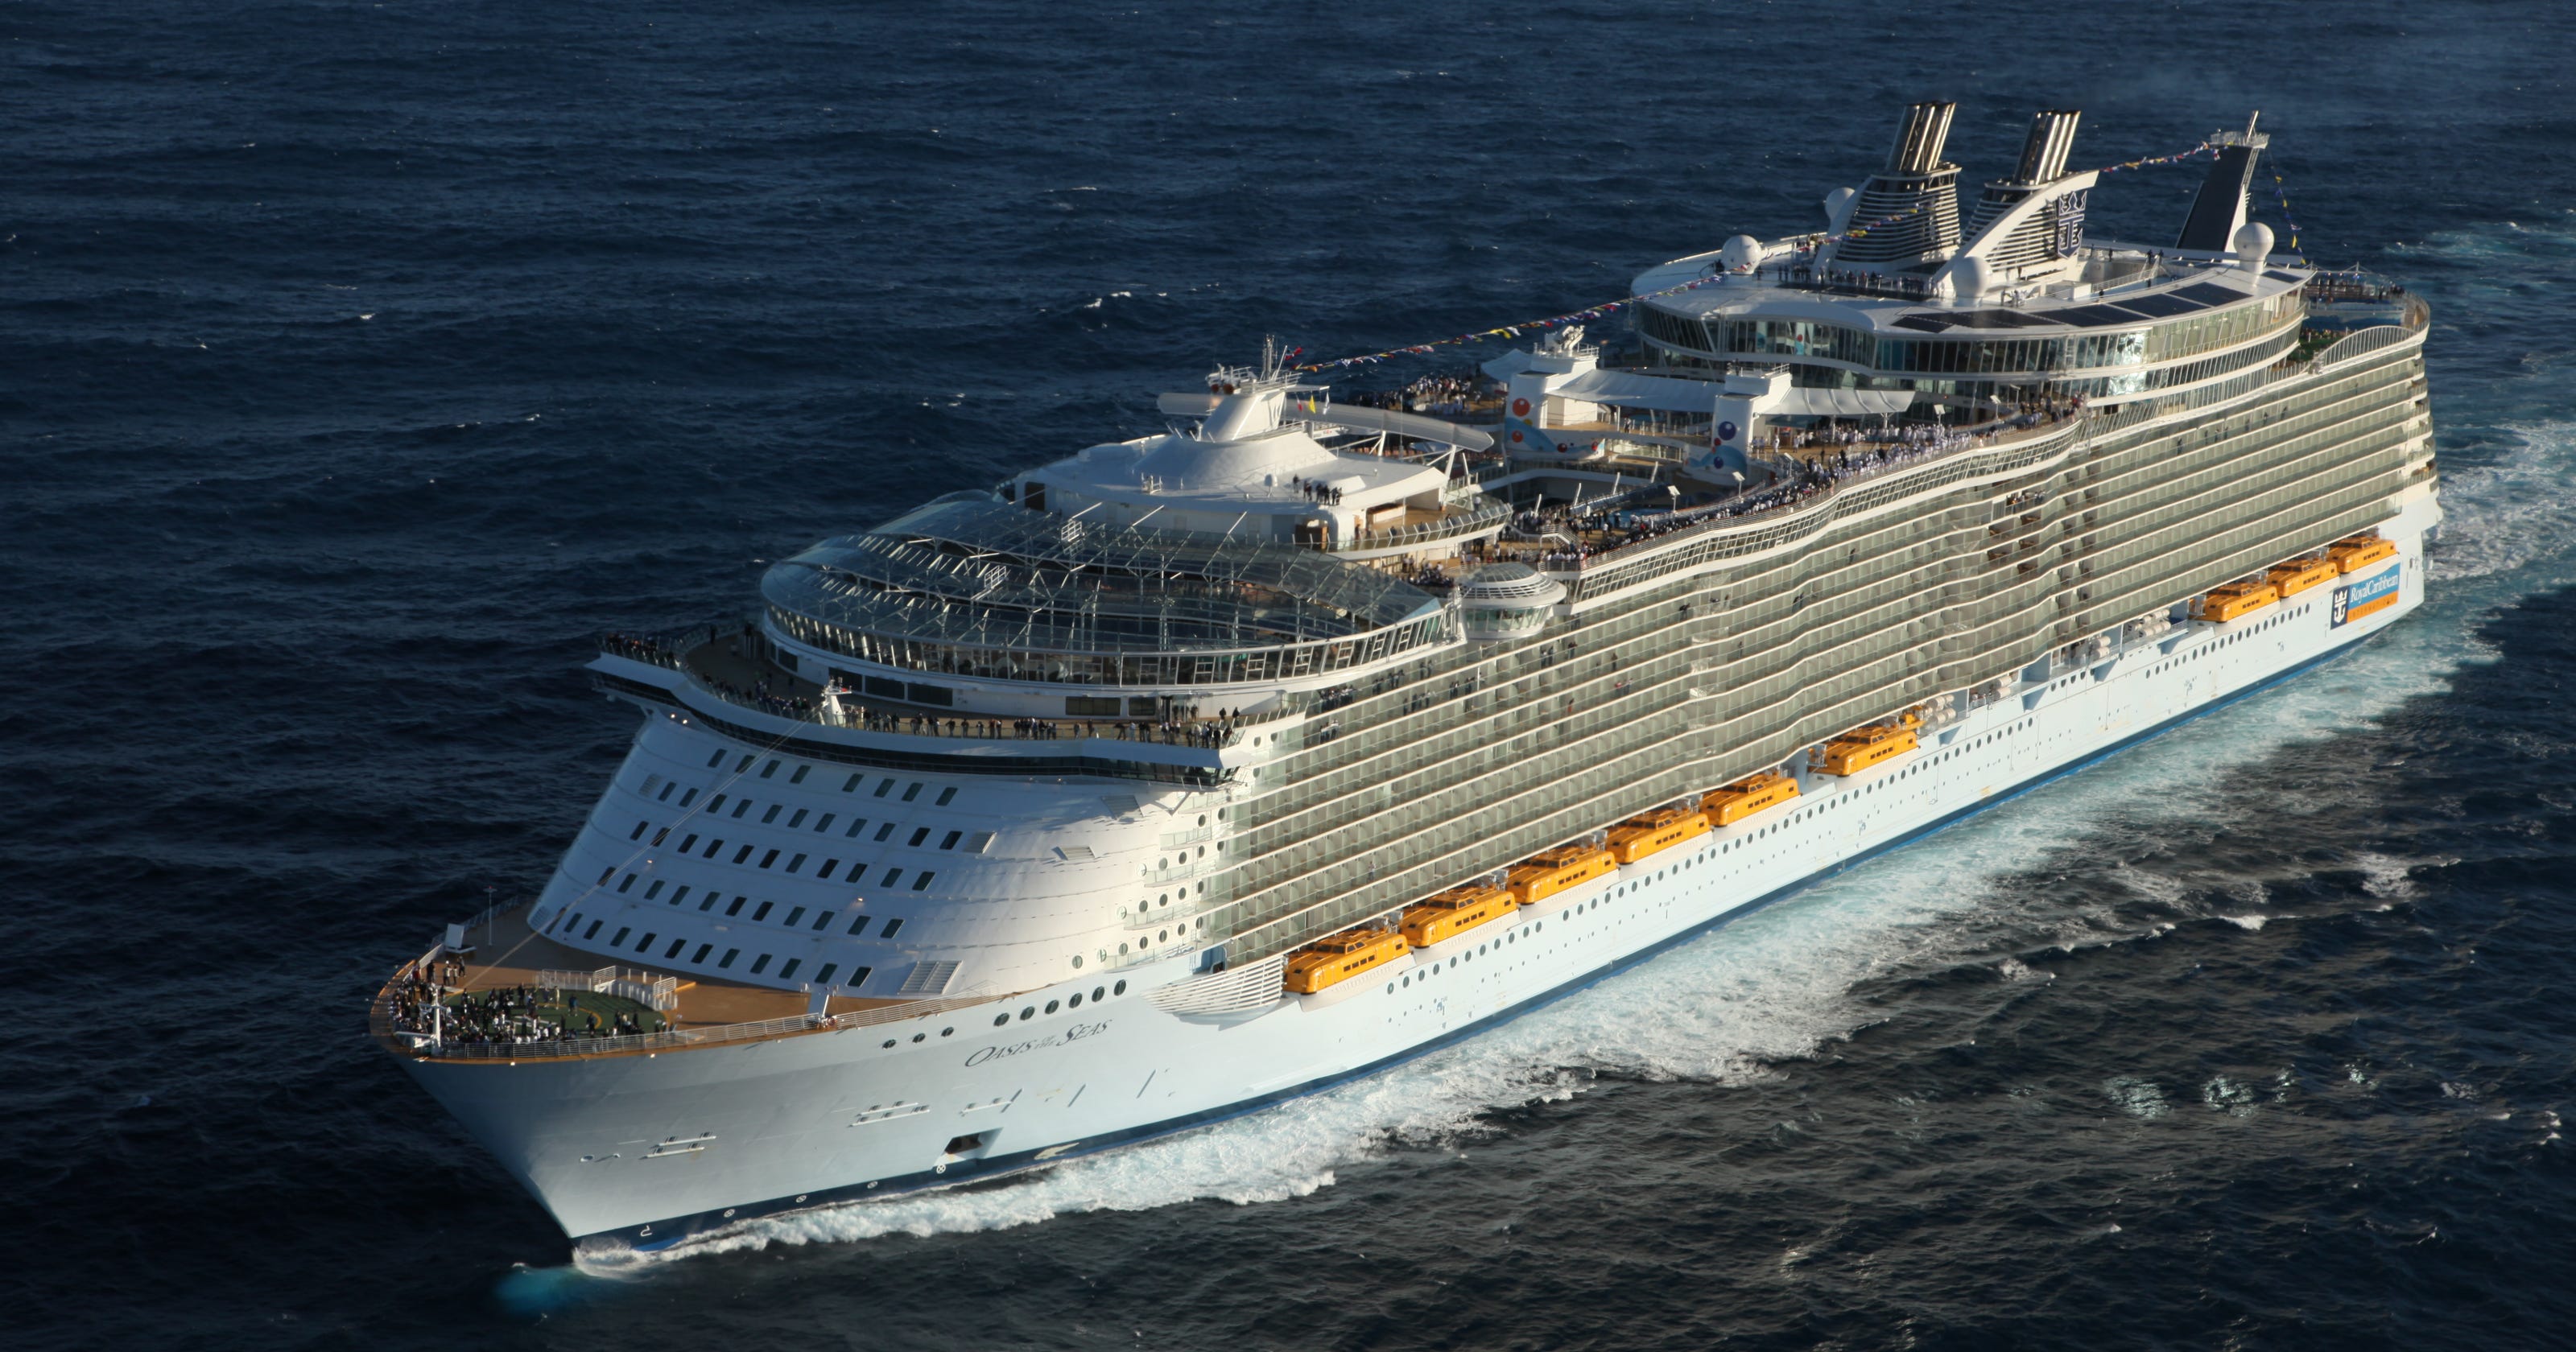 Cruise ship review: Royal Caribbean's Oasis of the Seas